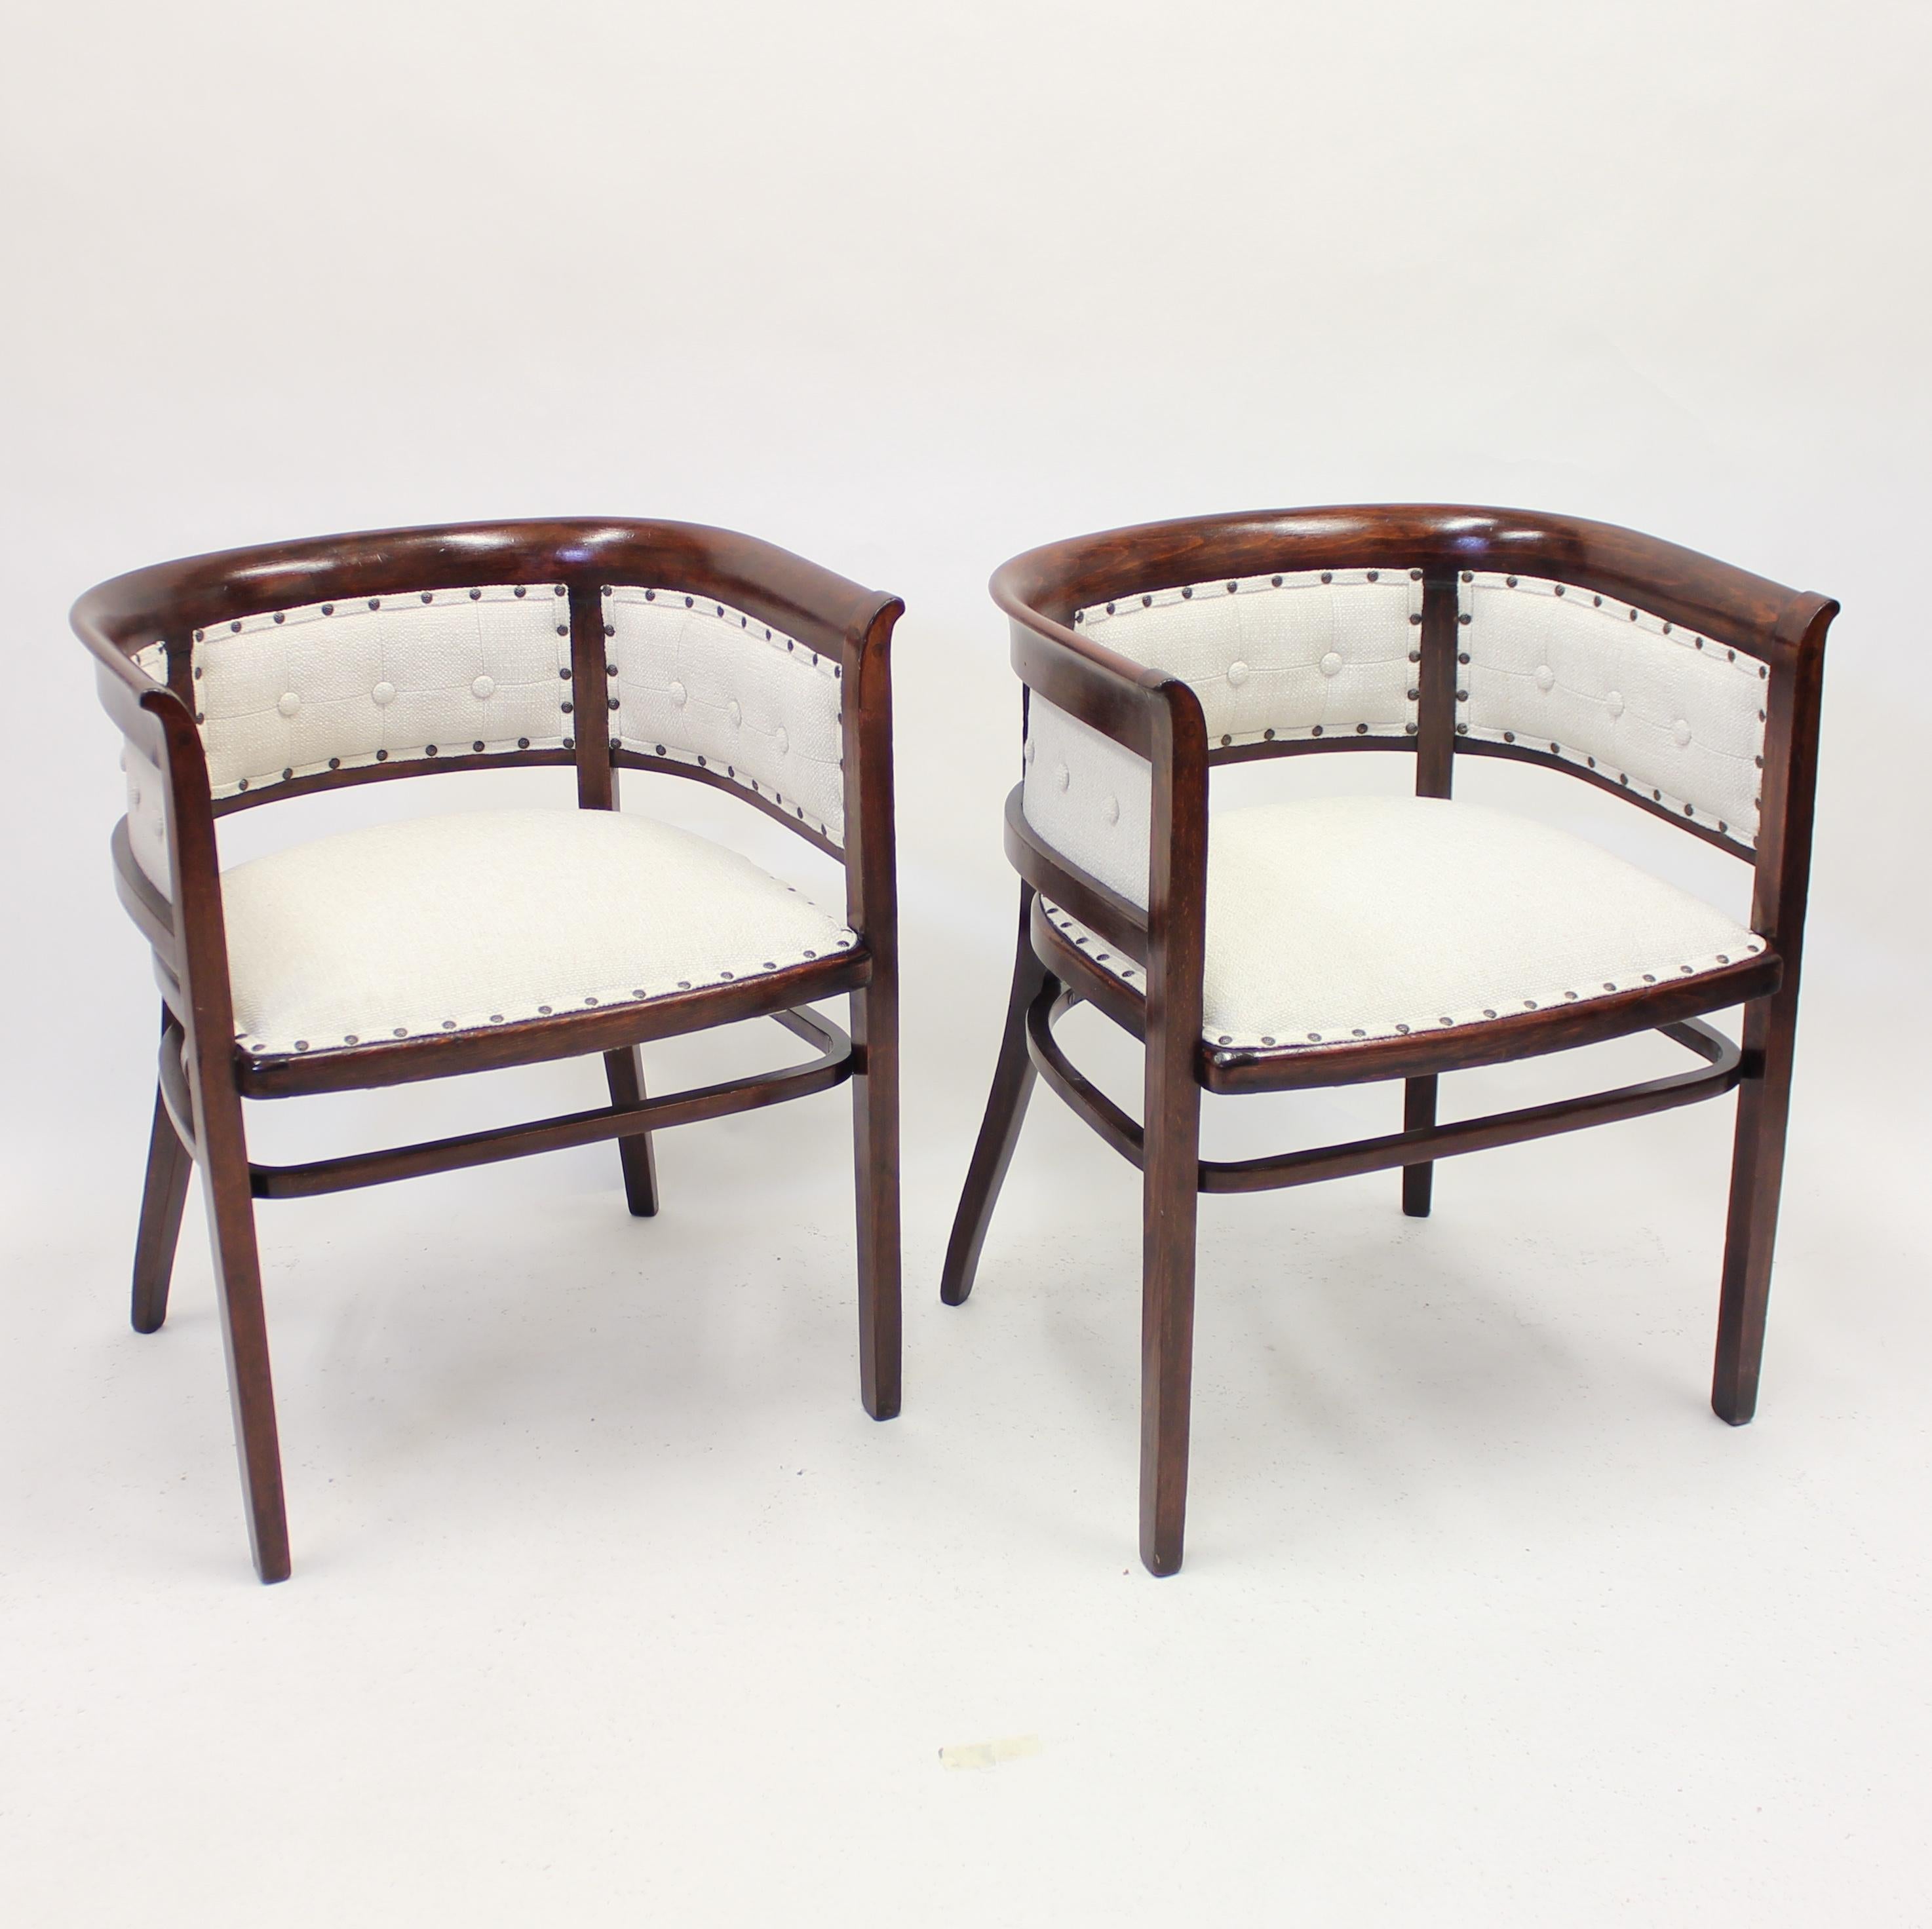 Vienna Secession Pair of Fischel Armchairs, in the Style of Josef Hoffmann, Early 20th Century